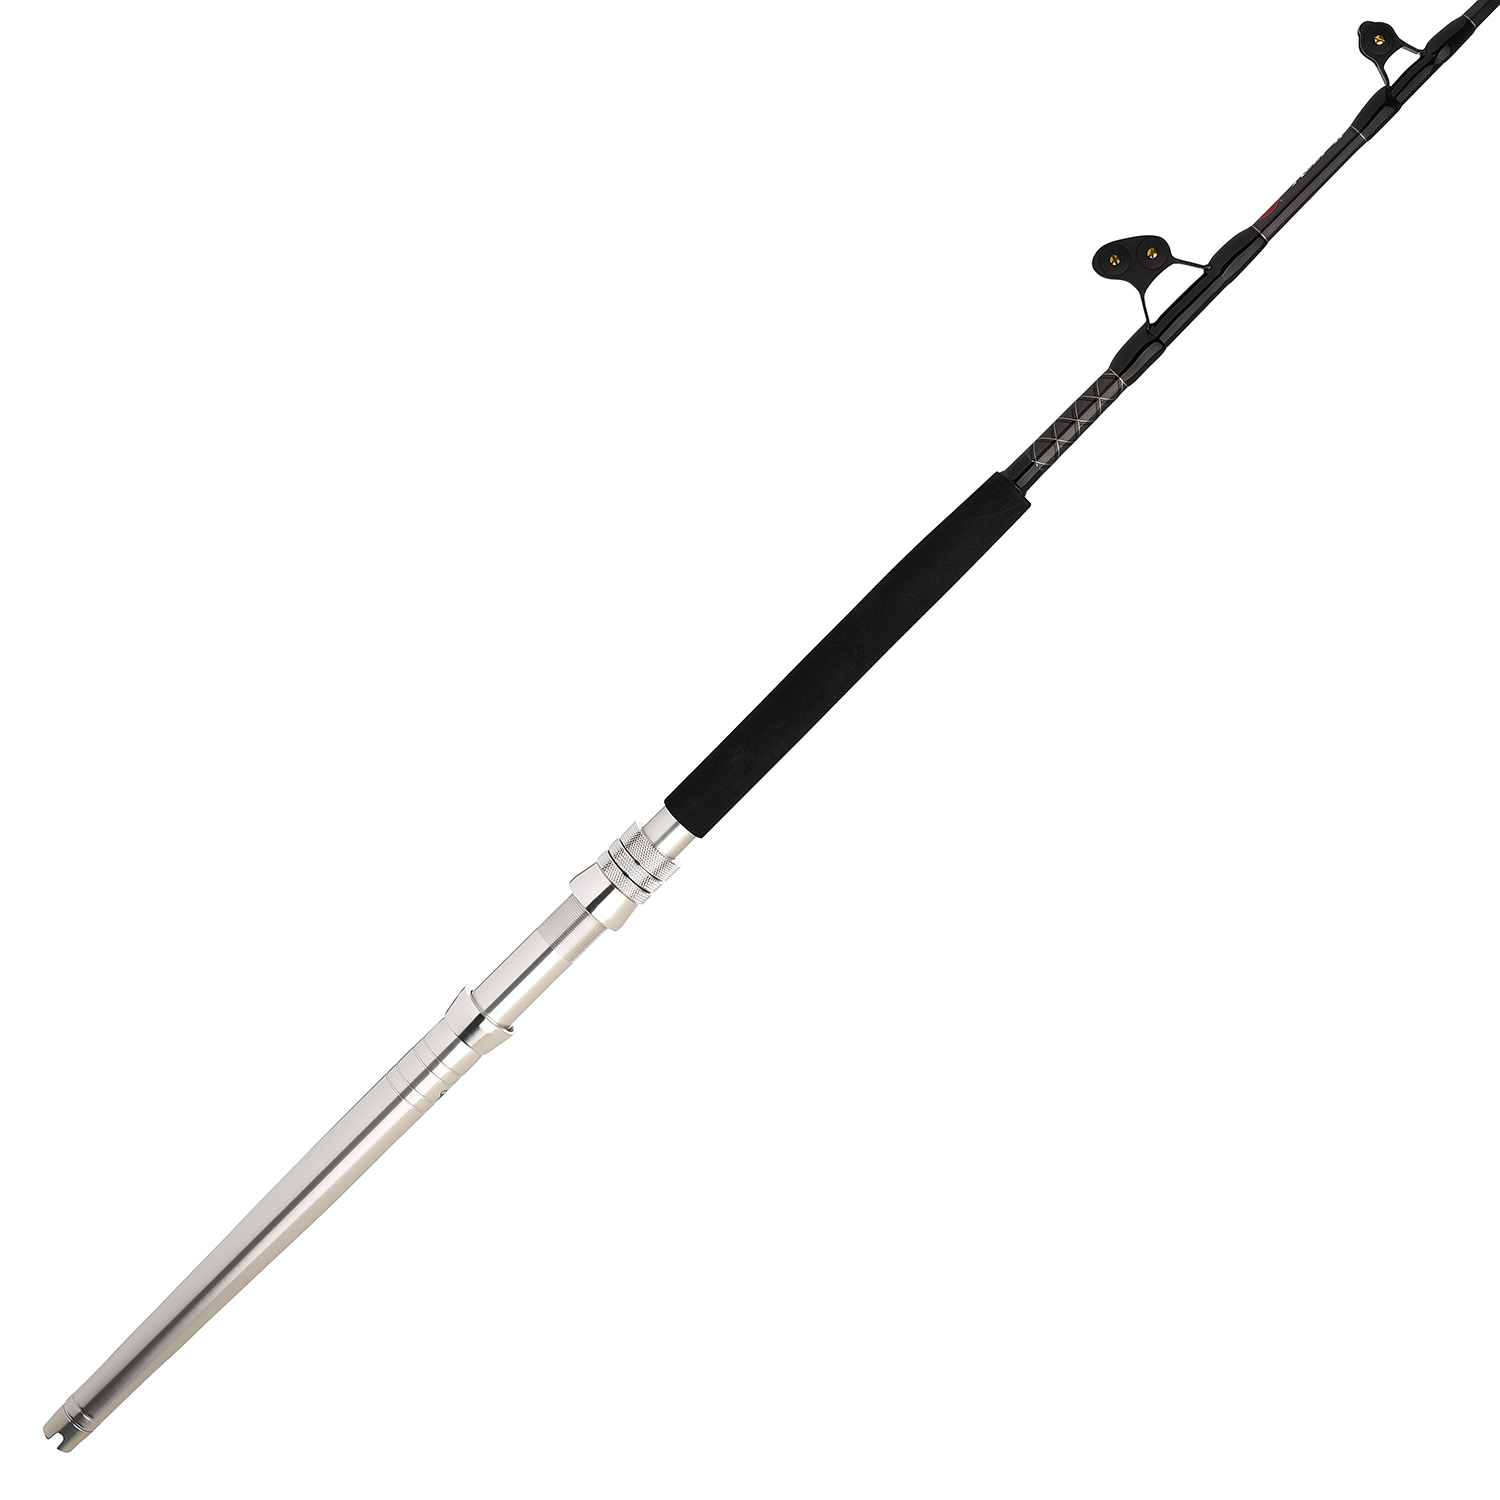 SEA FISHING ROD, 2 pieces, roll blade 1600. Miscellaneous - Fishing  equipment - Auctionet